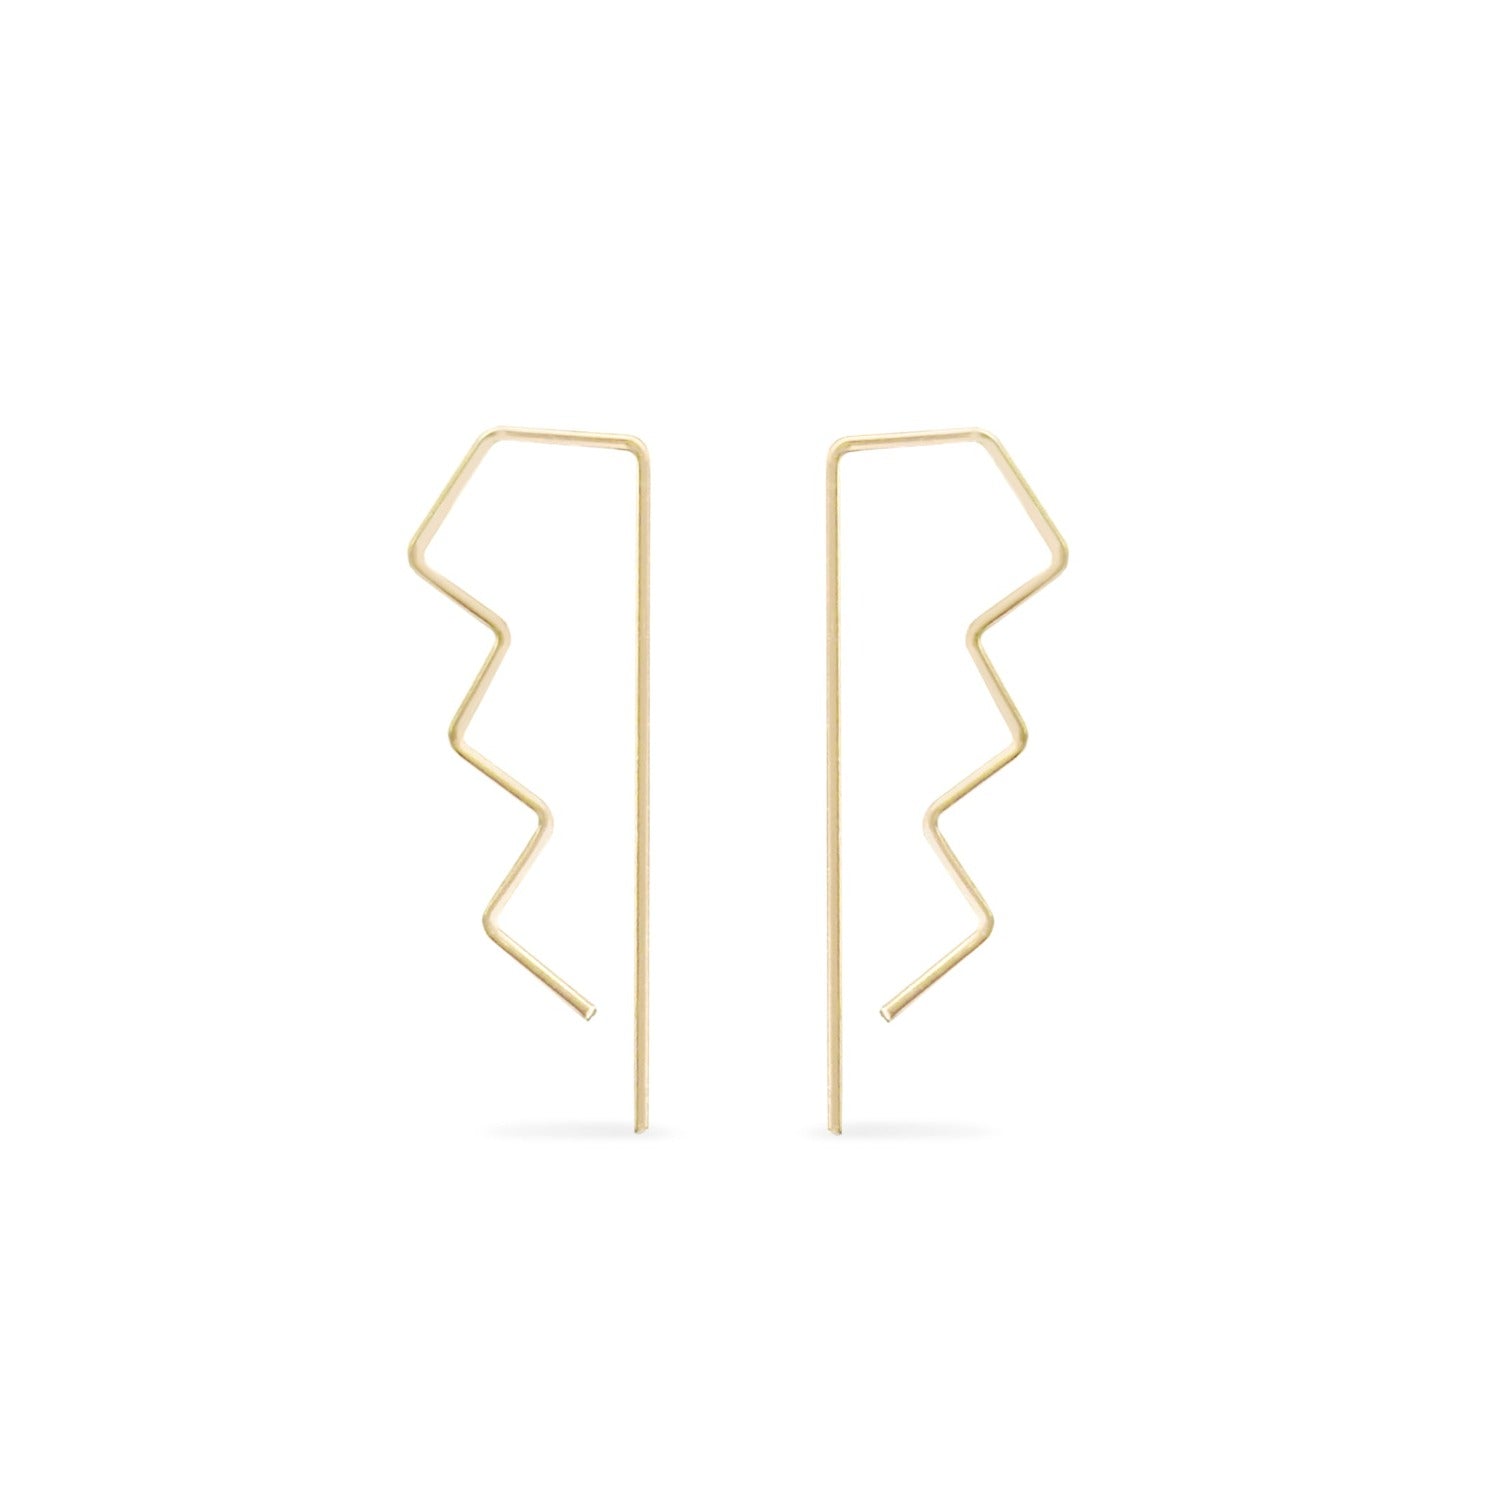 Small step zig zag wire pull through hoop earrings in gold